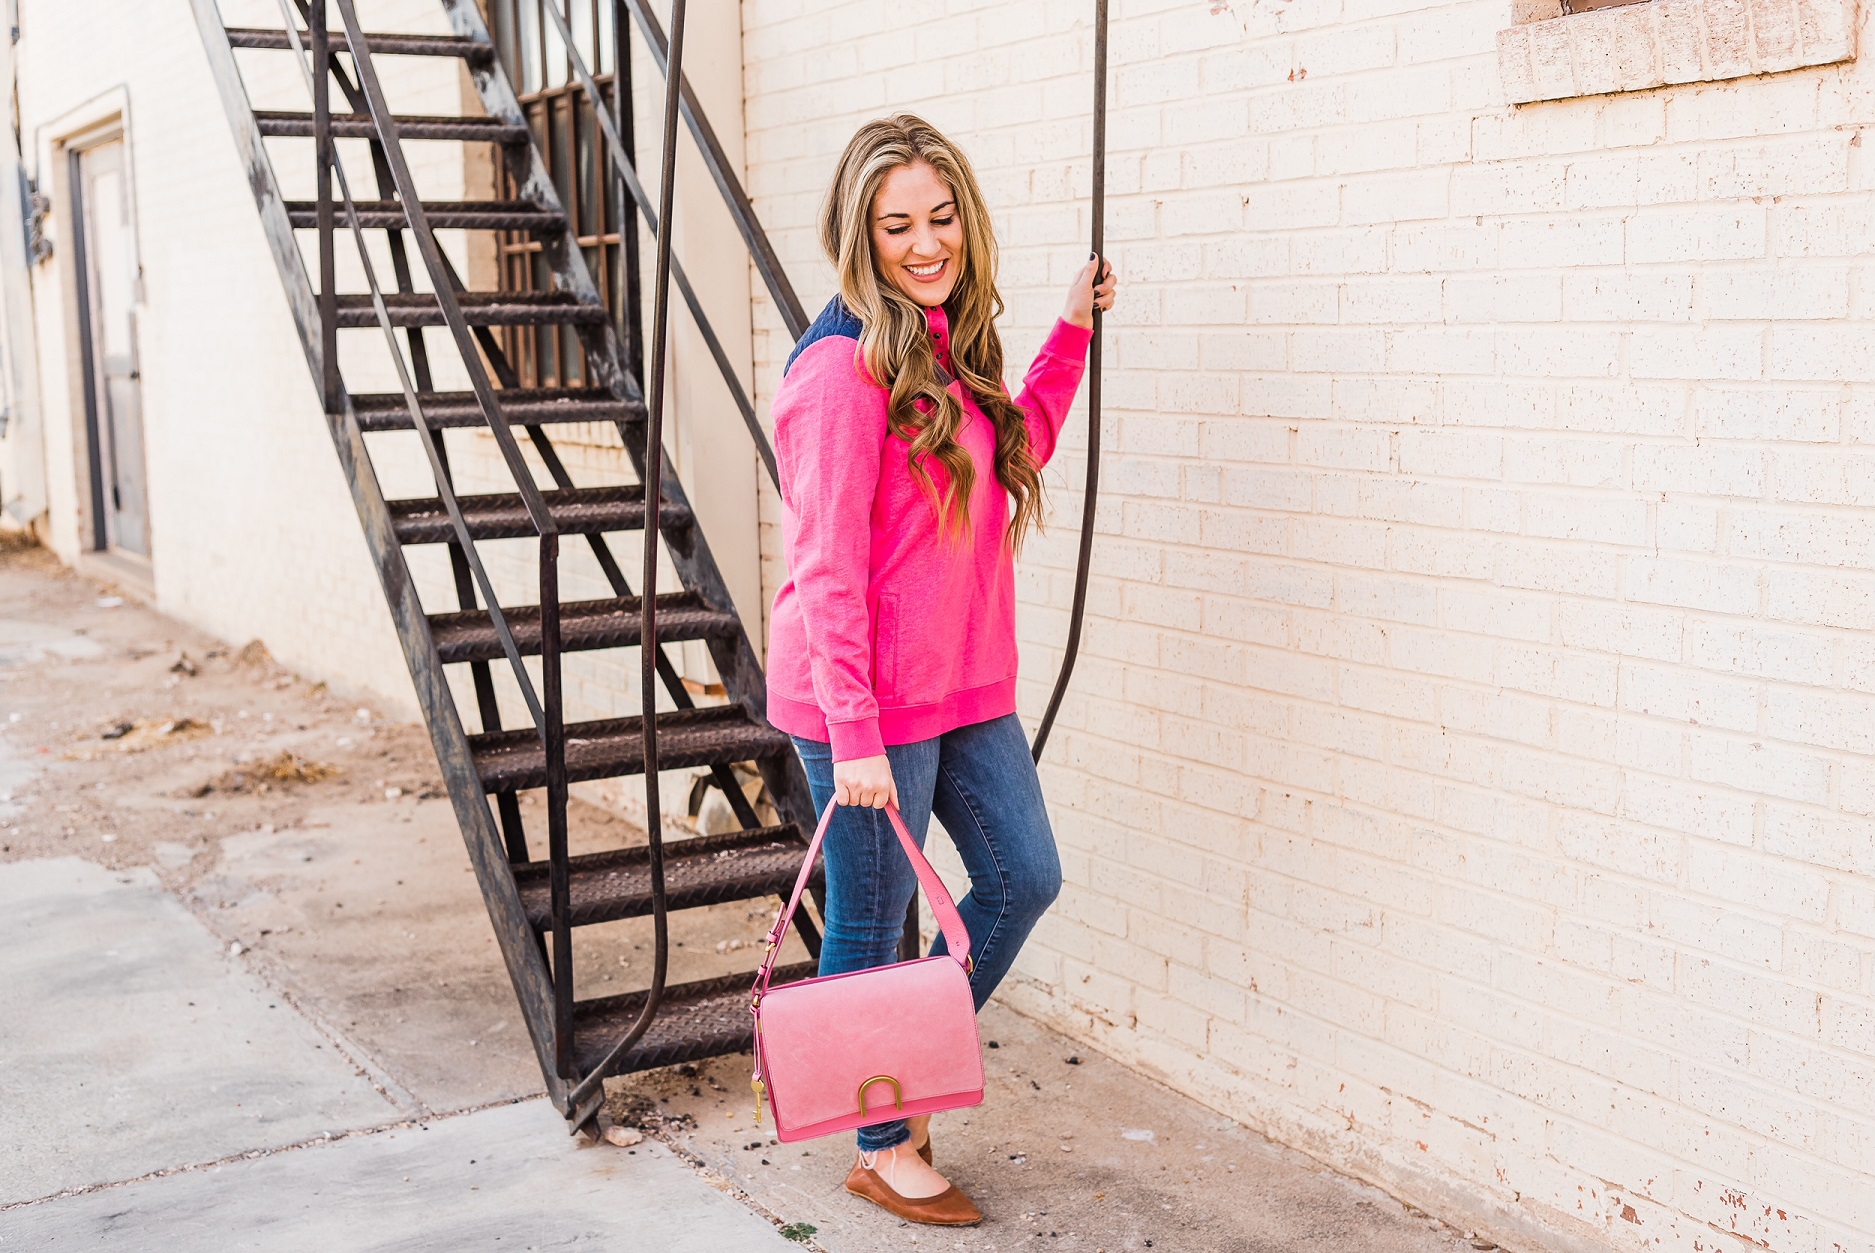 Nordstrom Pink Pullover outfit from East Memphis fashion blogger Walking in Memphis in High Heels